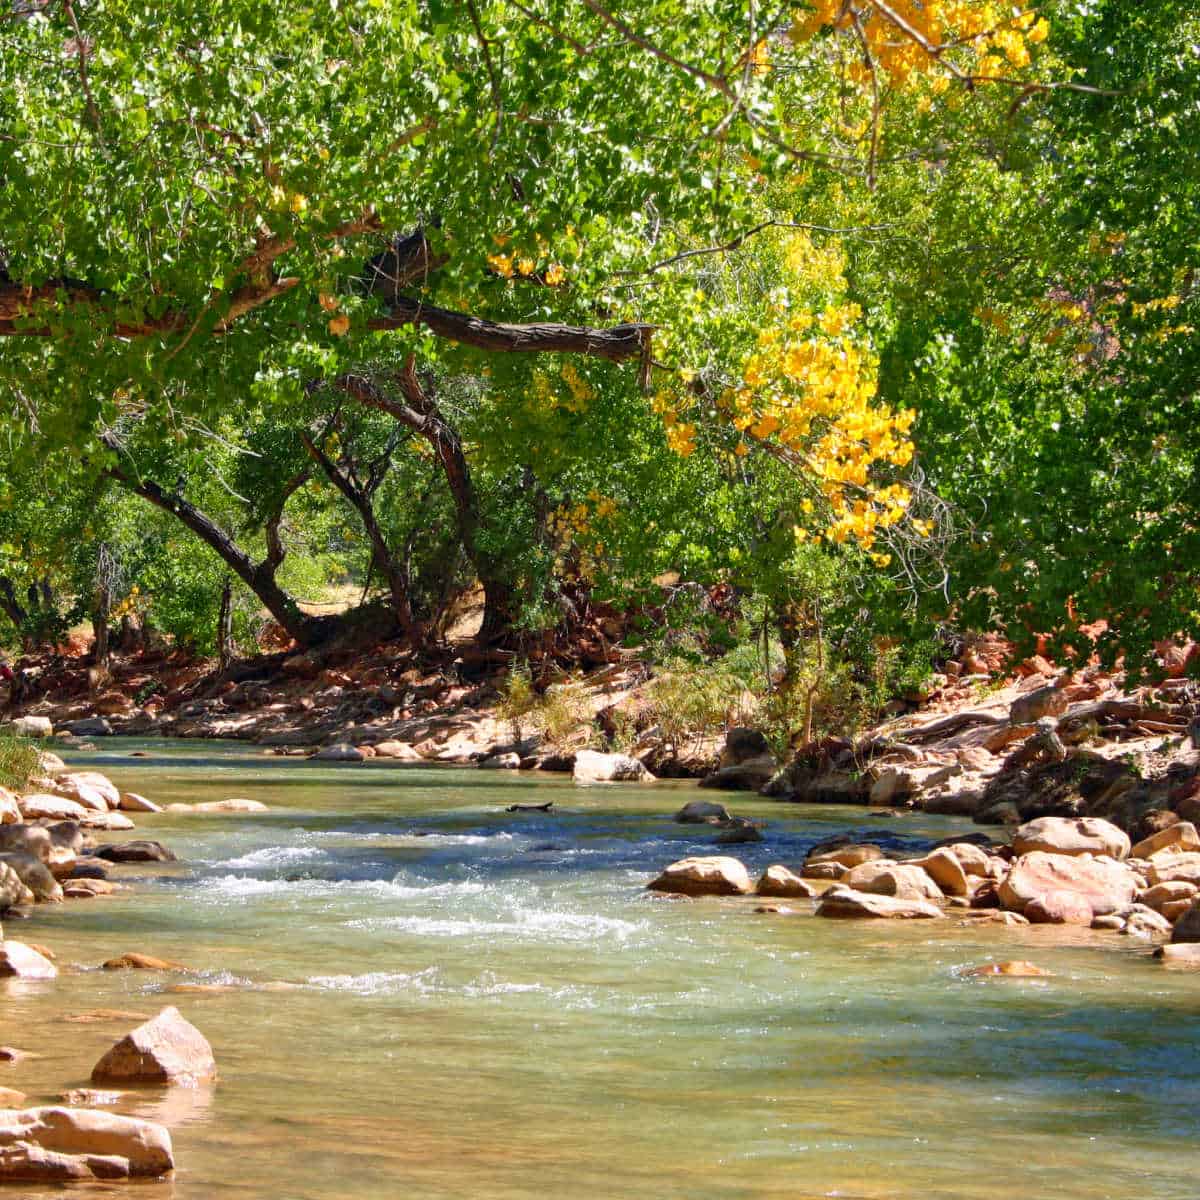 Fall colors on the Cottonwood Trees lining the Virgin River in Zion National Park in the Fall